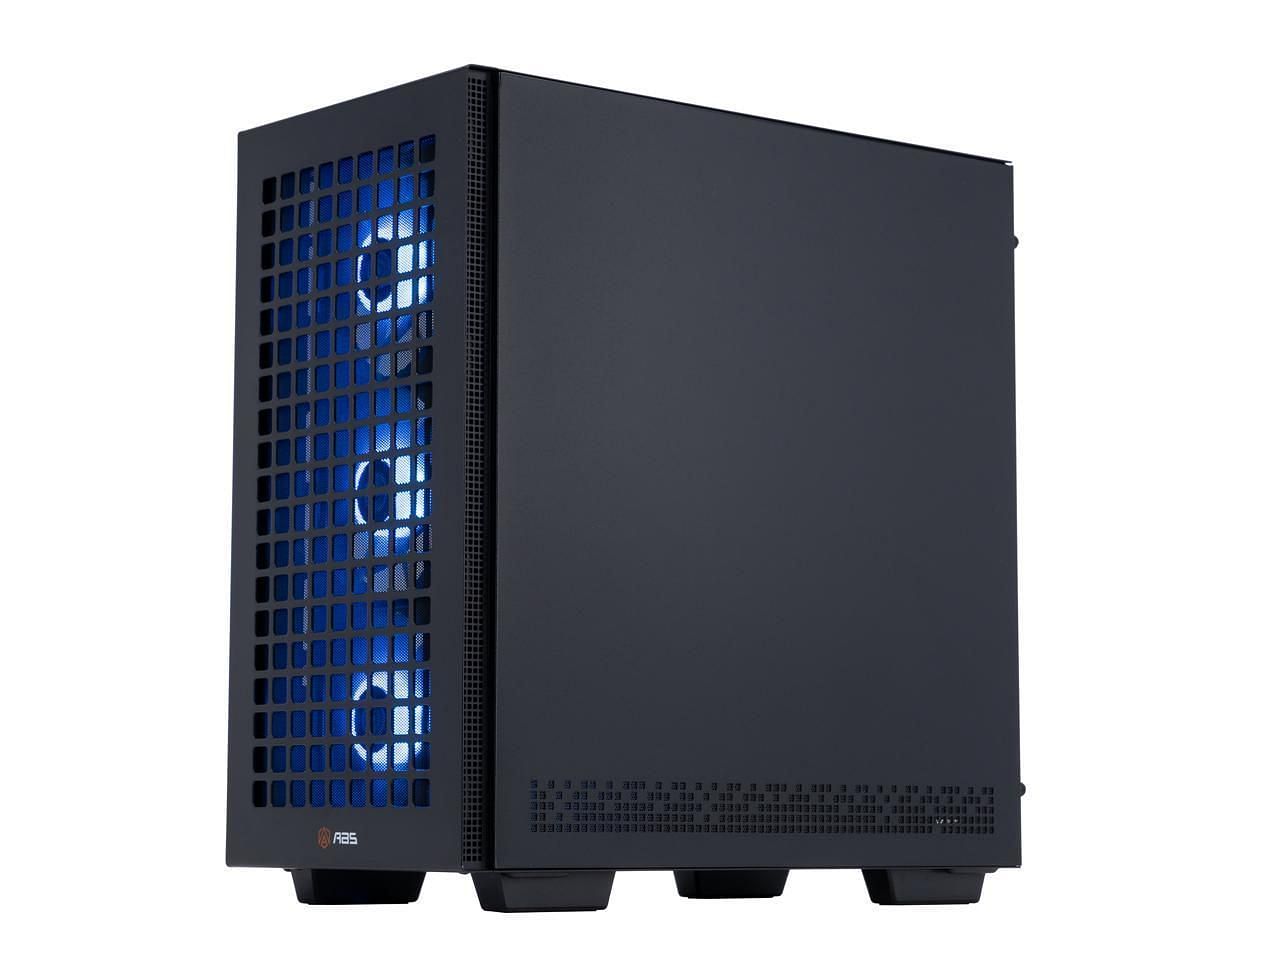 The ABS Aeolian-M Aqua RTX 4070 is one of the best gaming PCs under $1,400 (Image via Newegg)